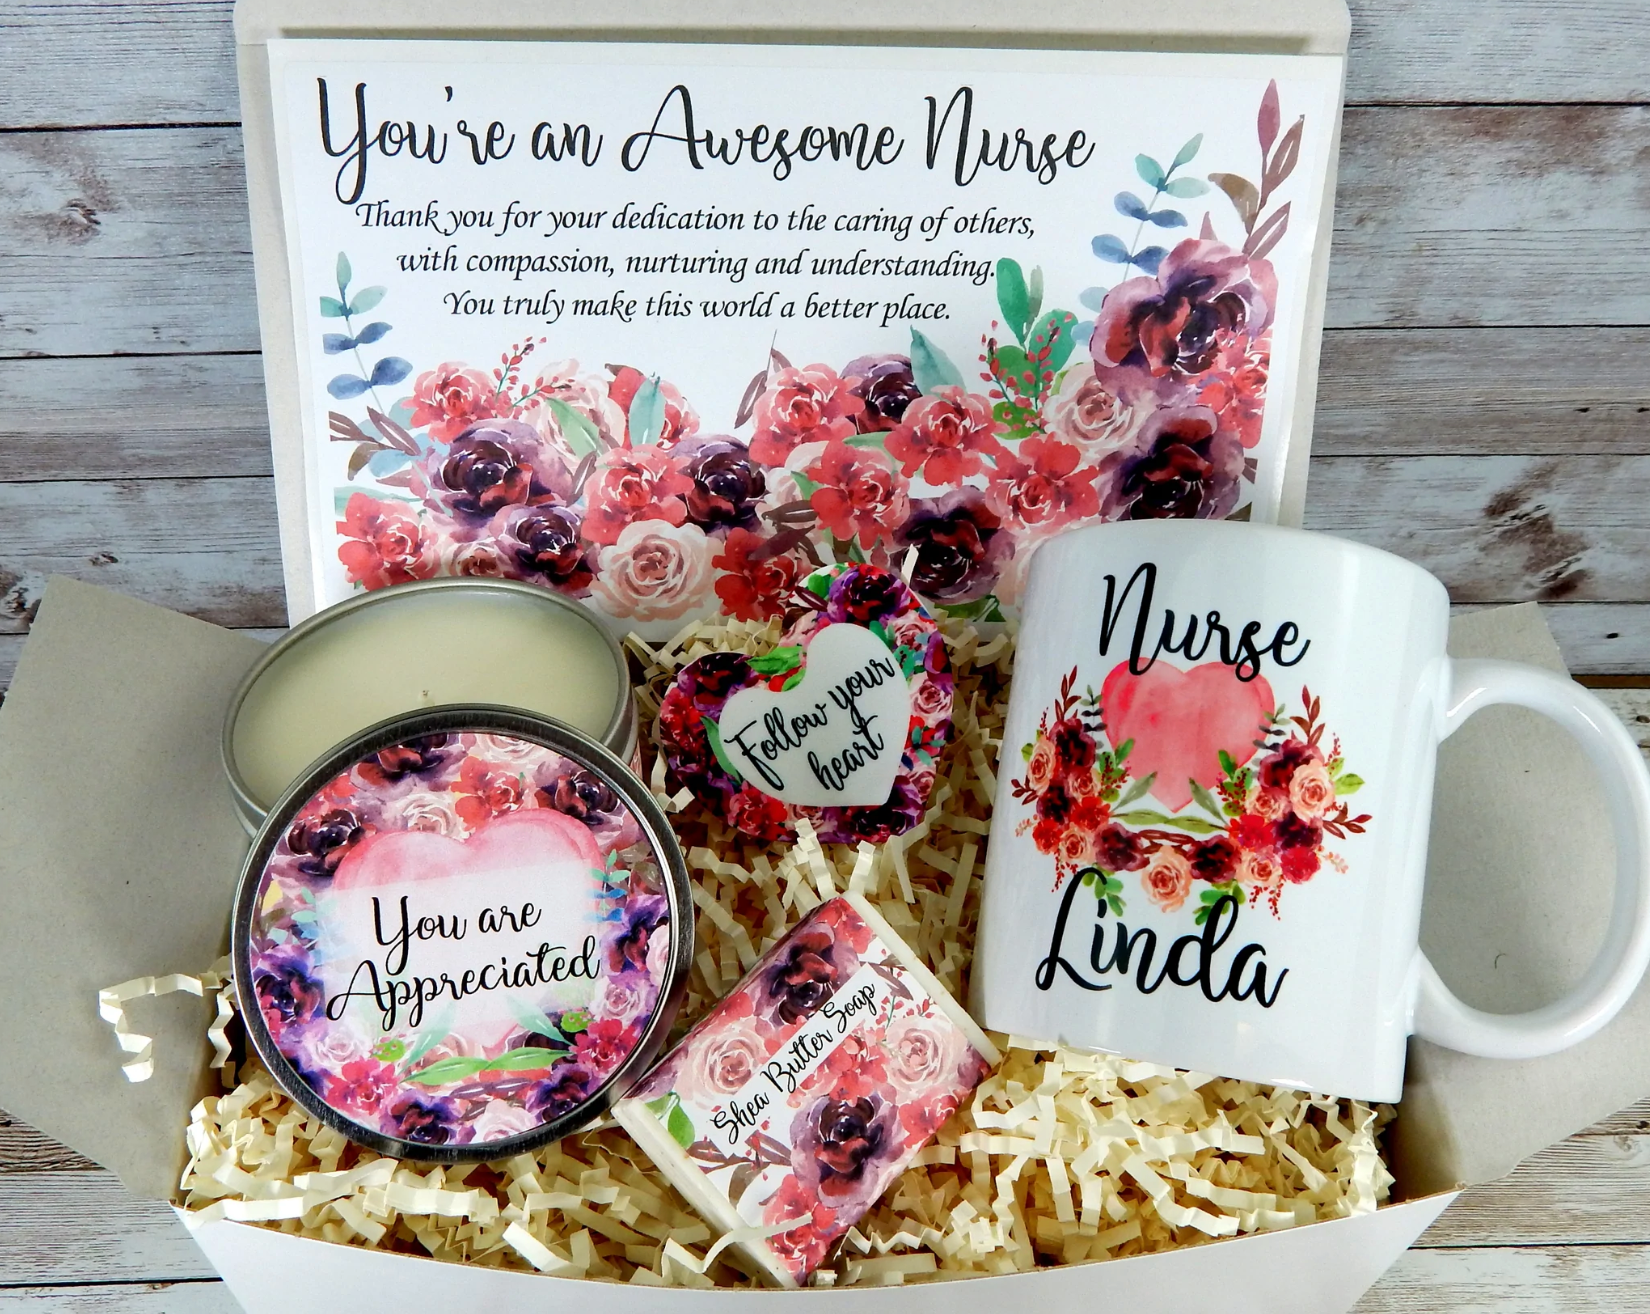 Worlds Best Nurse Gifts for Women - 9oz Lavender Soy Candle Gifts for Nurses  - Nurse Appreciation Gifts from Patients - RN Registered Nurse Gifts for  Female Nurse, Nursing School Graduation Presents :